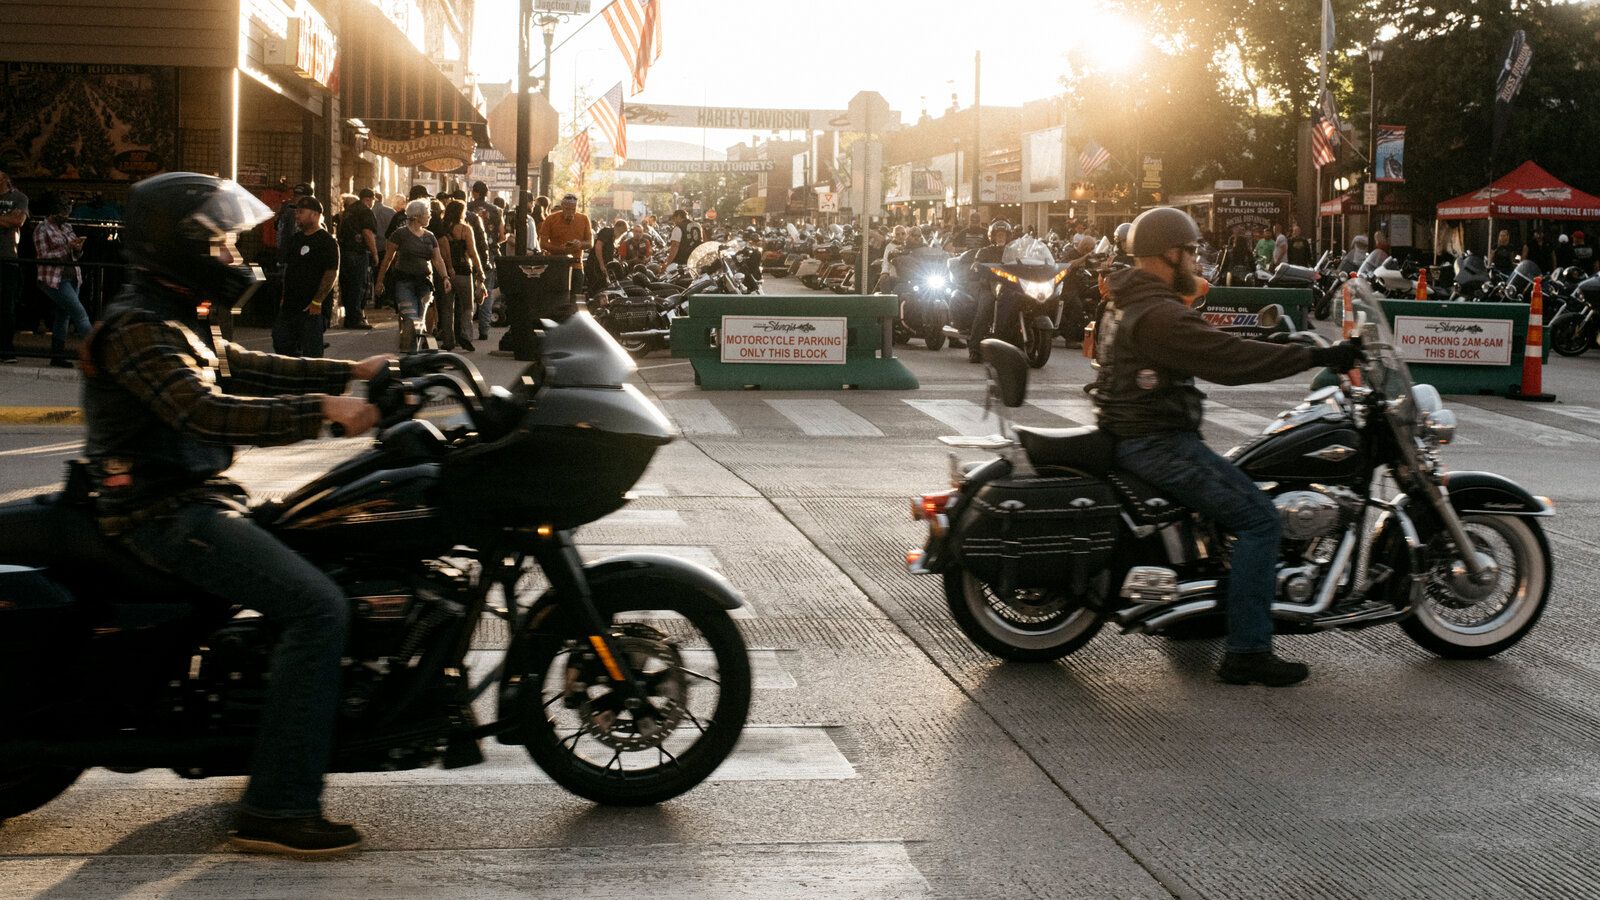 Scenes From the 2020 Sturgis Rally, Undaunted